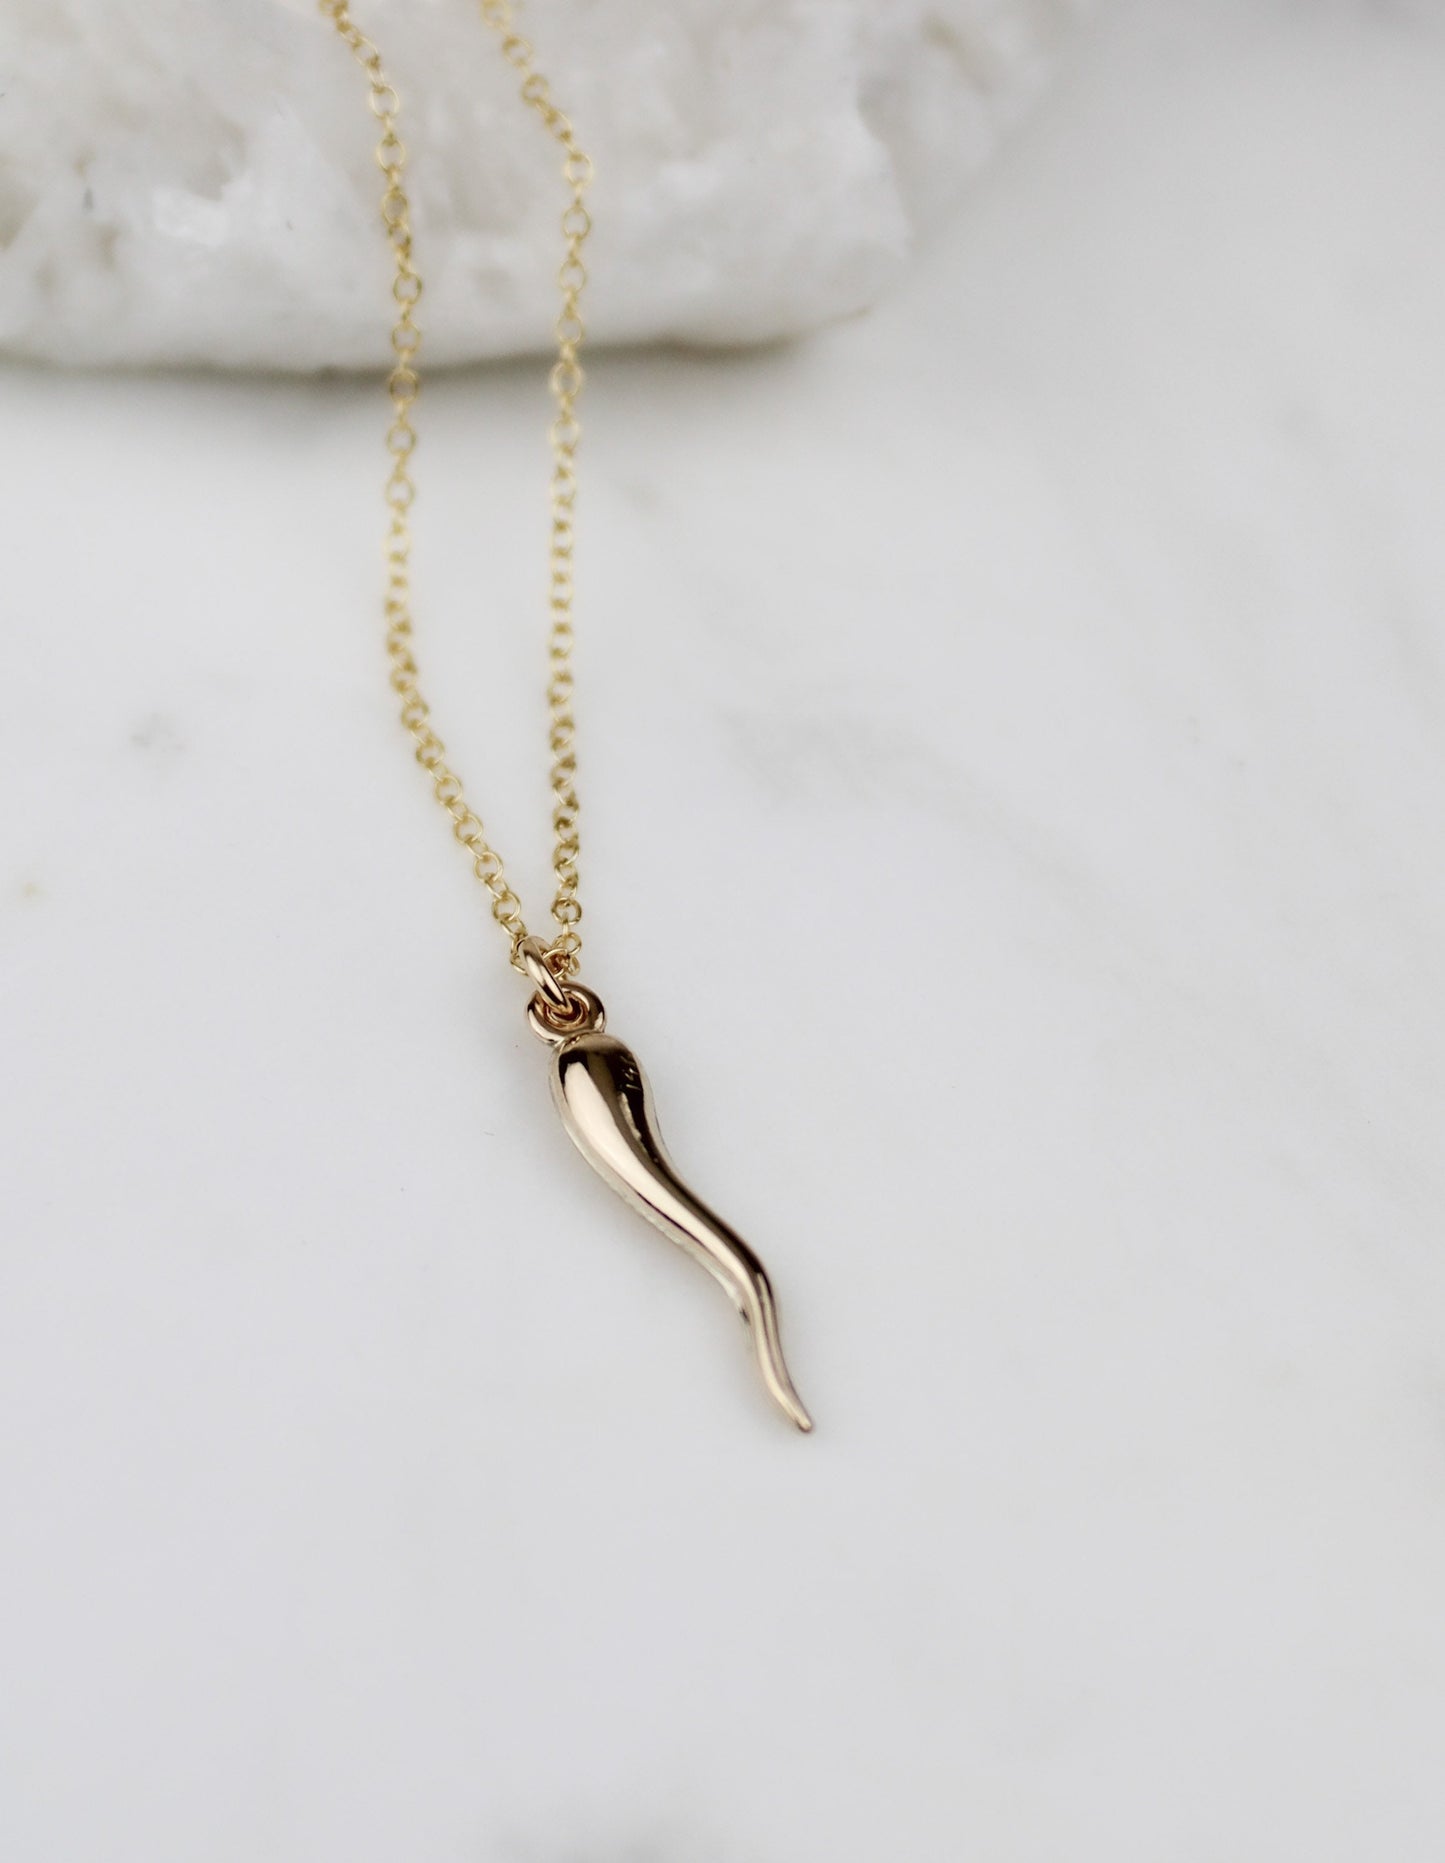 Italian horn necklace, dainty necklace, layering necklace, protection necklace, necklaces for women, Horn necklace, Gold filled necklace